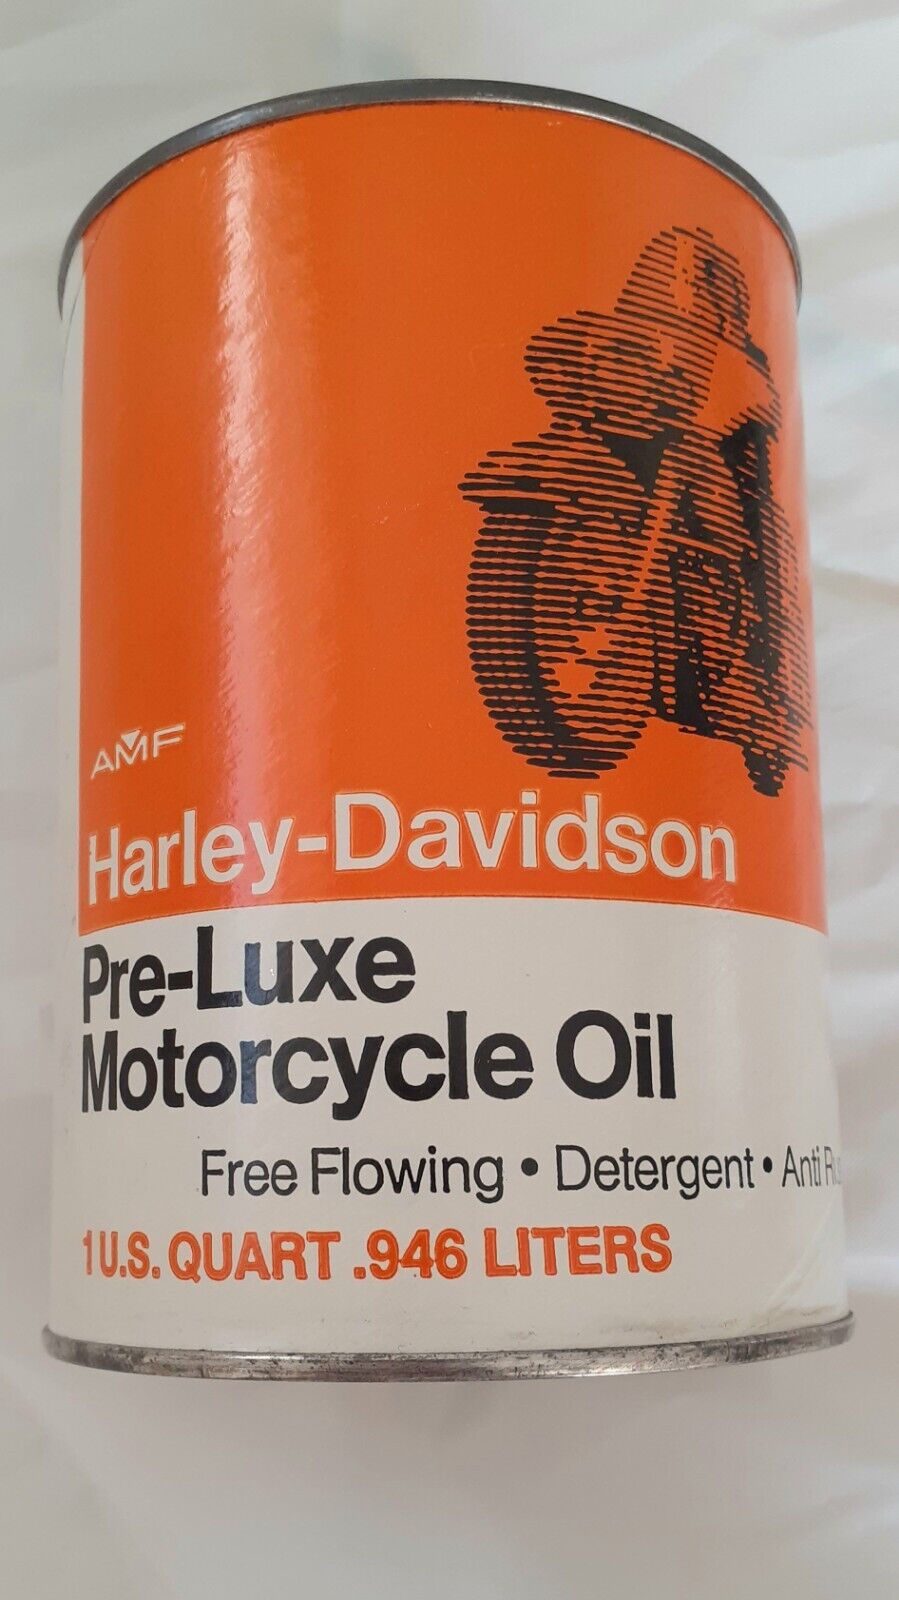 VINTAGE AMF HARLEY DAVIDSON PRE-LUXE MOTORCYCLE OIL #75-7 SAE 40..UNOPENED